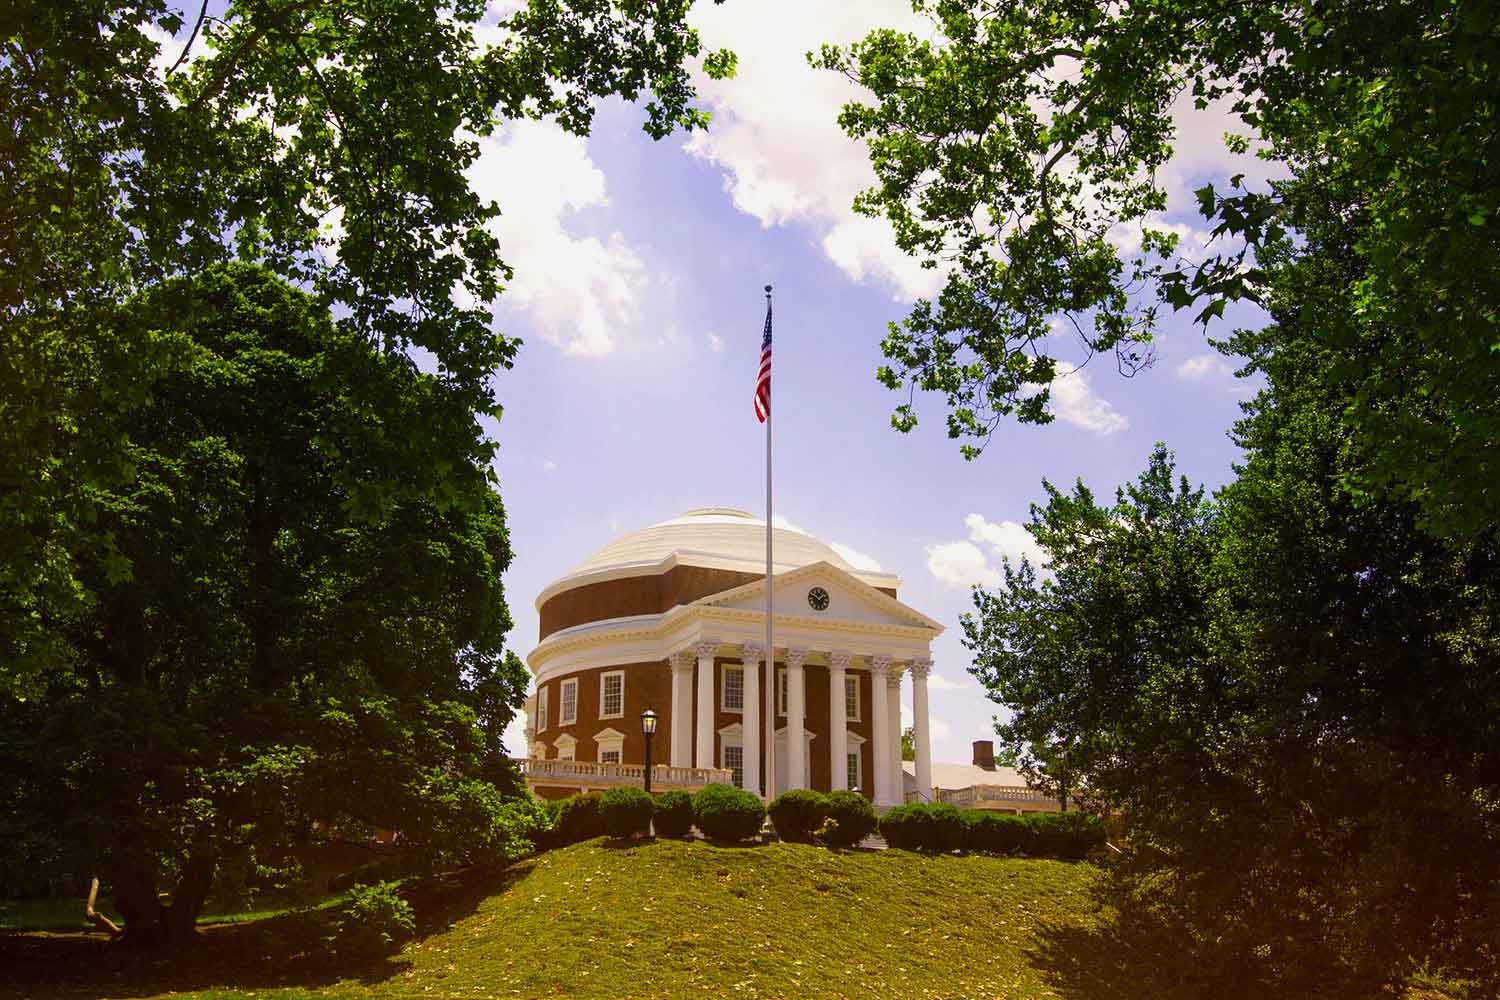 The Rotunda with an American flag in front on a pole